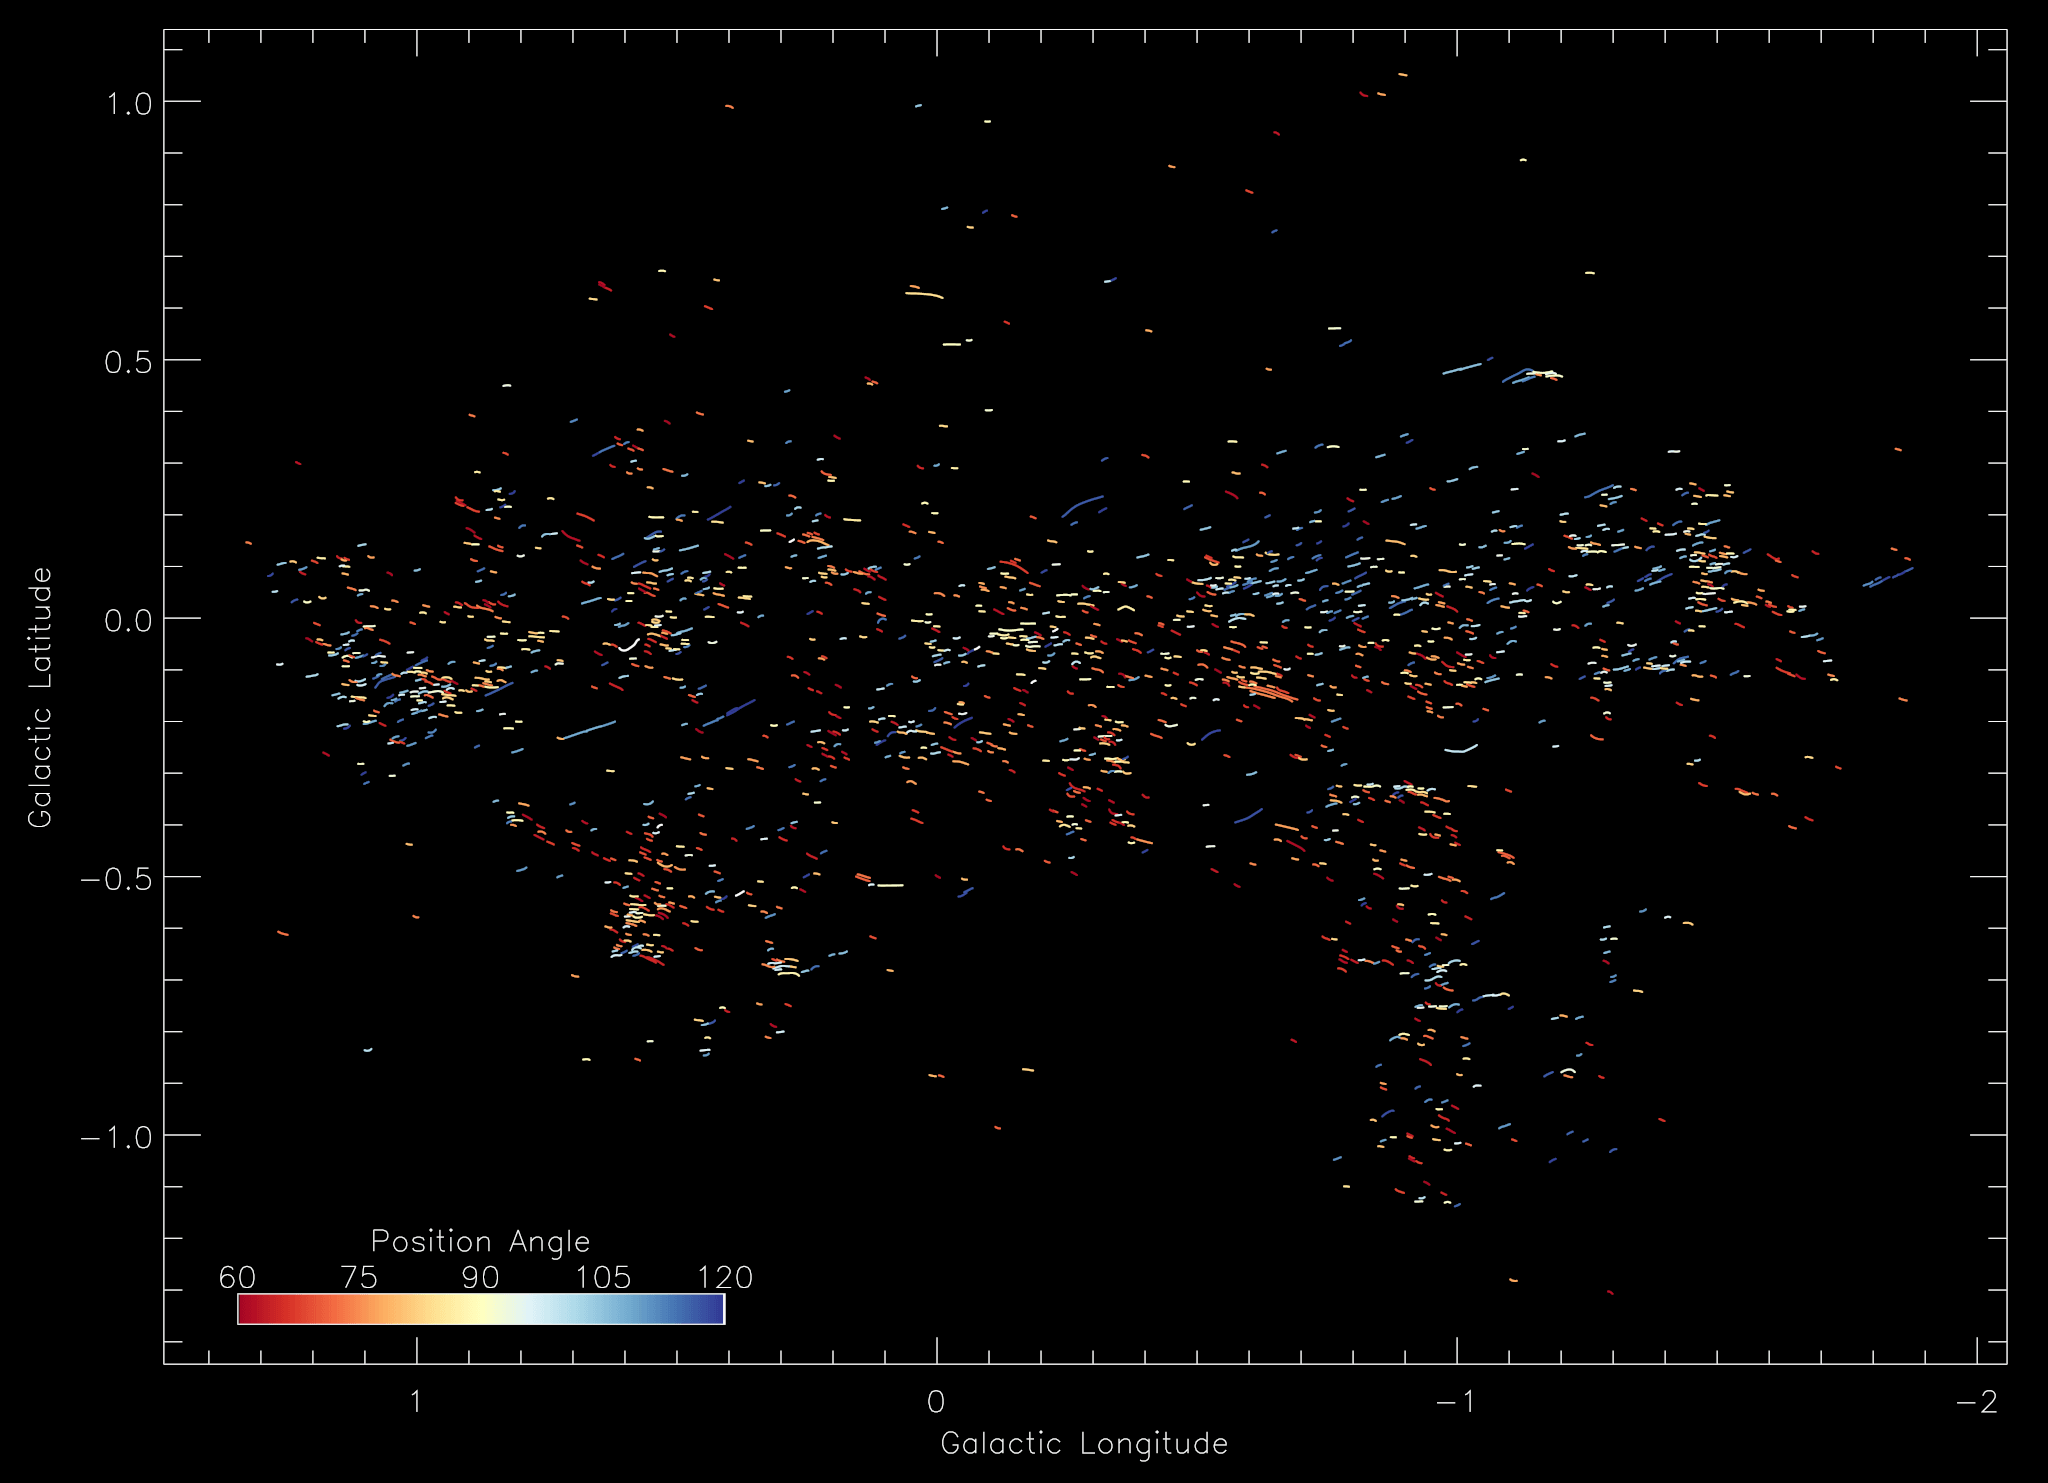 MeerKAT image of the galactic center with color-coded position angles of the short, radial filaments.